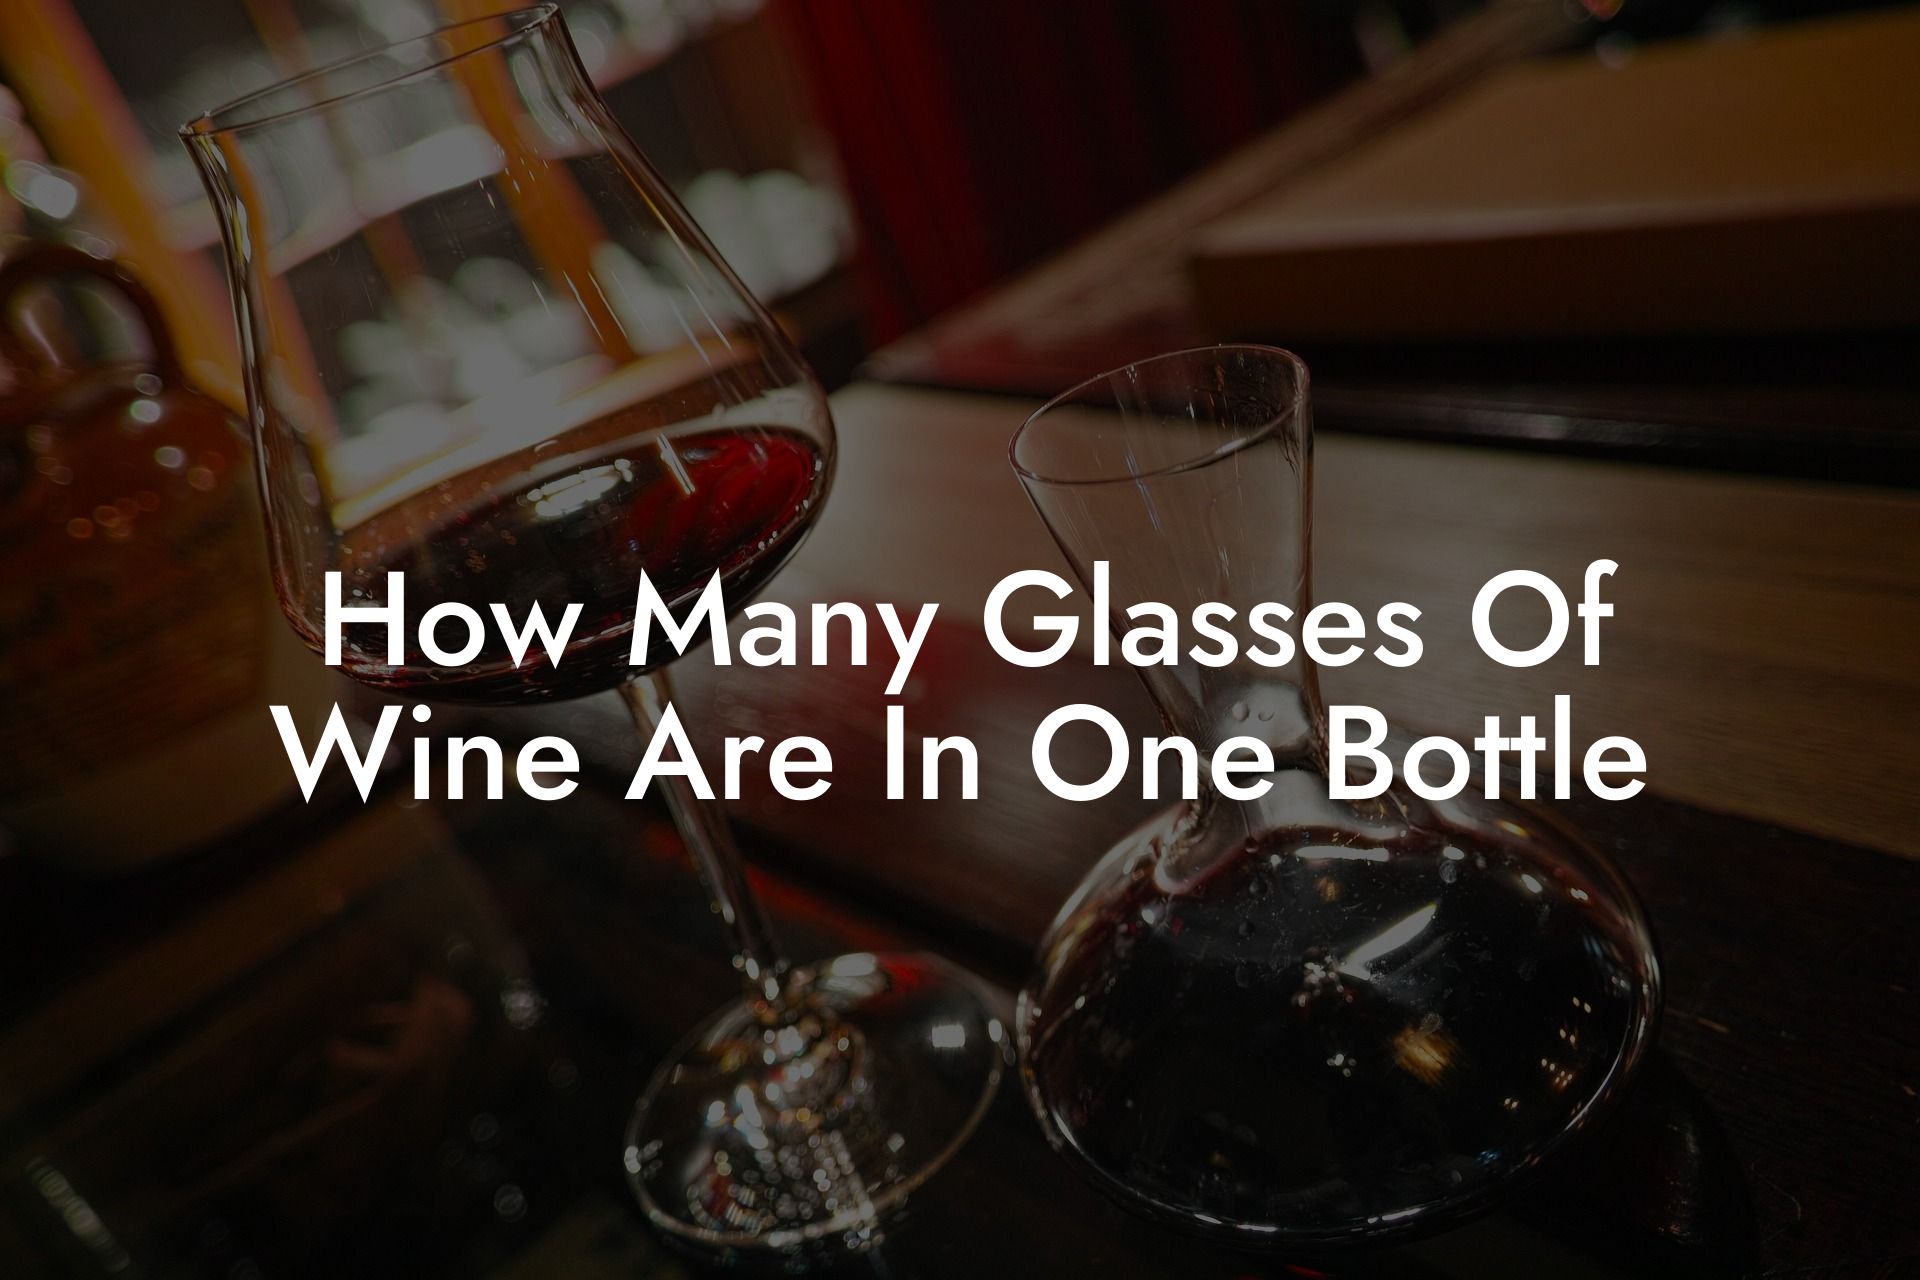 How Many Glasses Of Wine Are In One Bottle